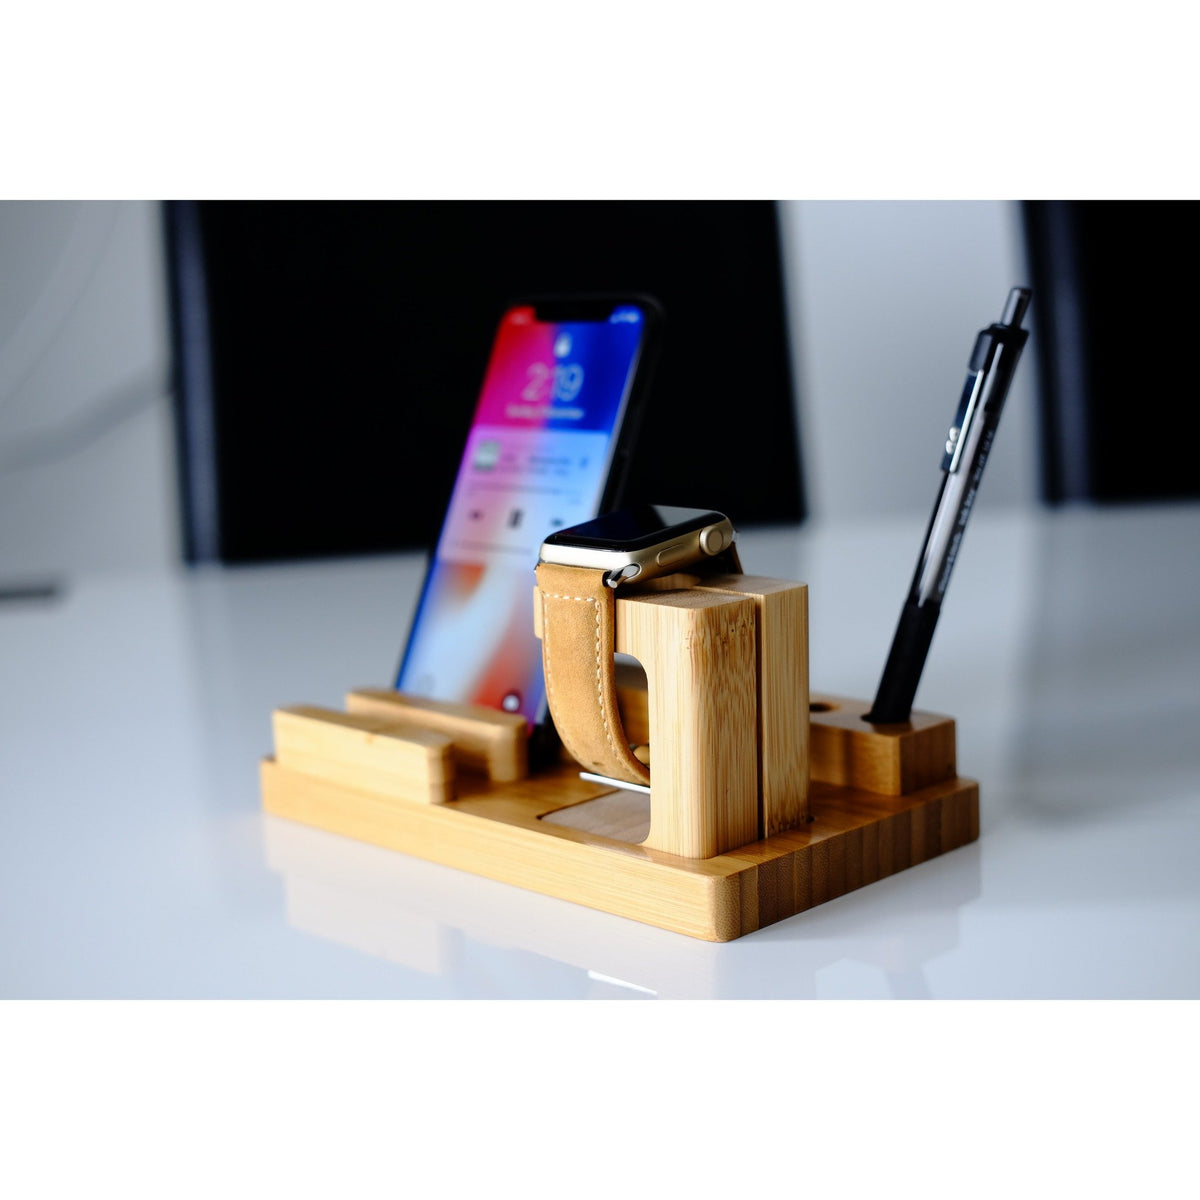 Apple Watch Stand - Bamboo Advanced - OzStraps